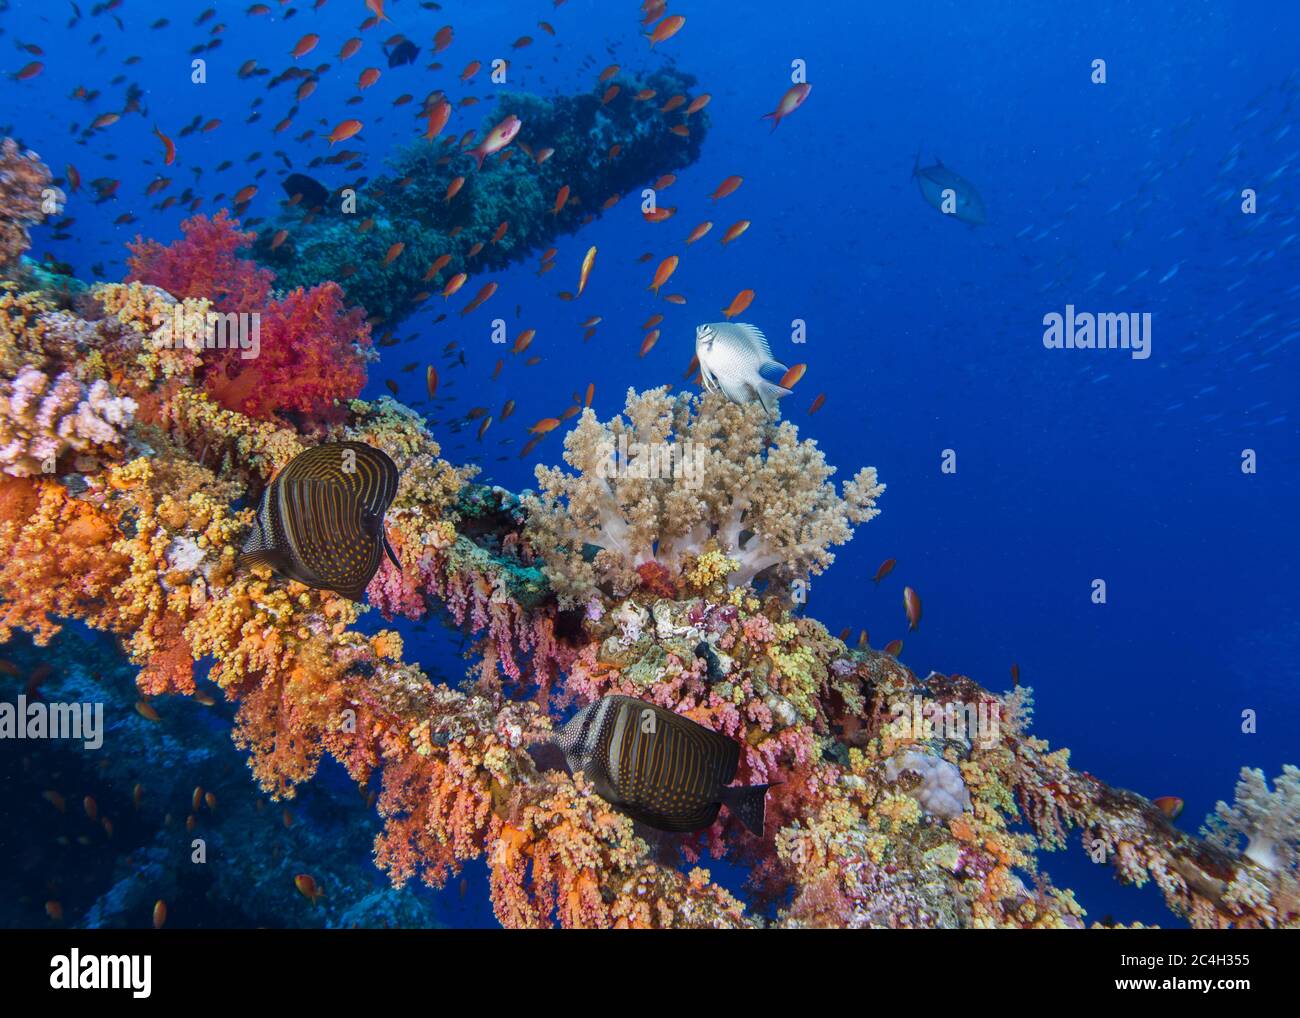 Underwater wreck covered in colorful coral reef and two Sailfin tang fish Stock Photo